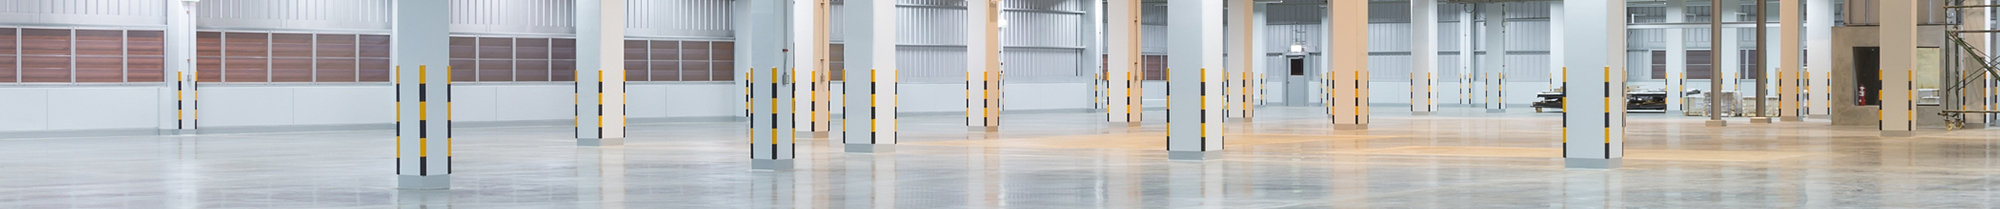 Bone Dry’s line of concrete sealers encapsulates moisture in concrete slabs and structures, extending their longevity.